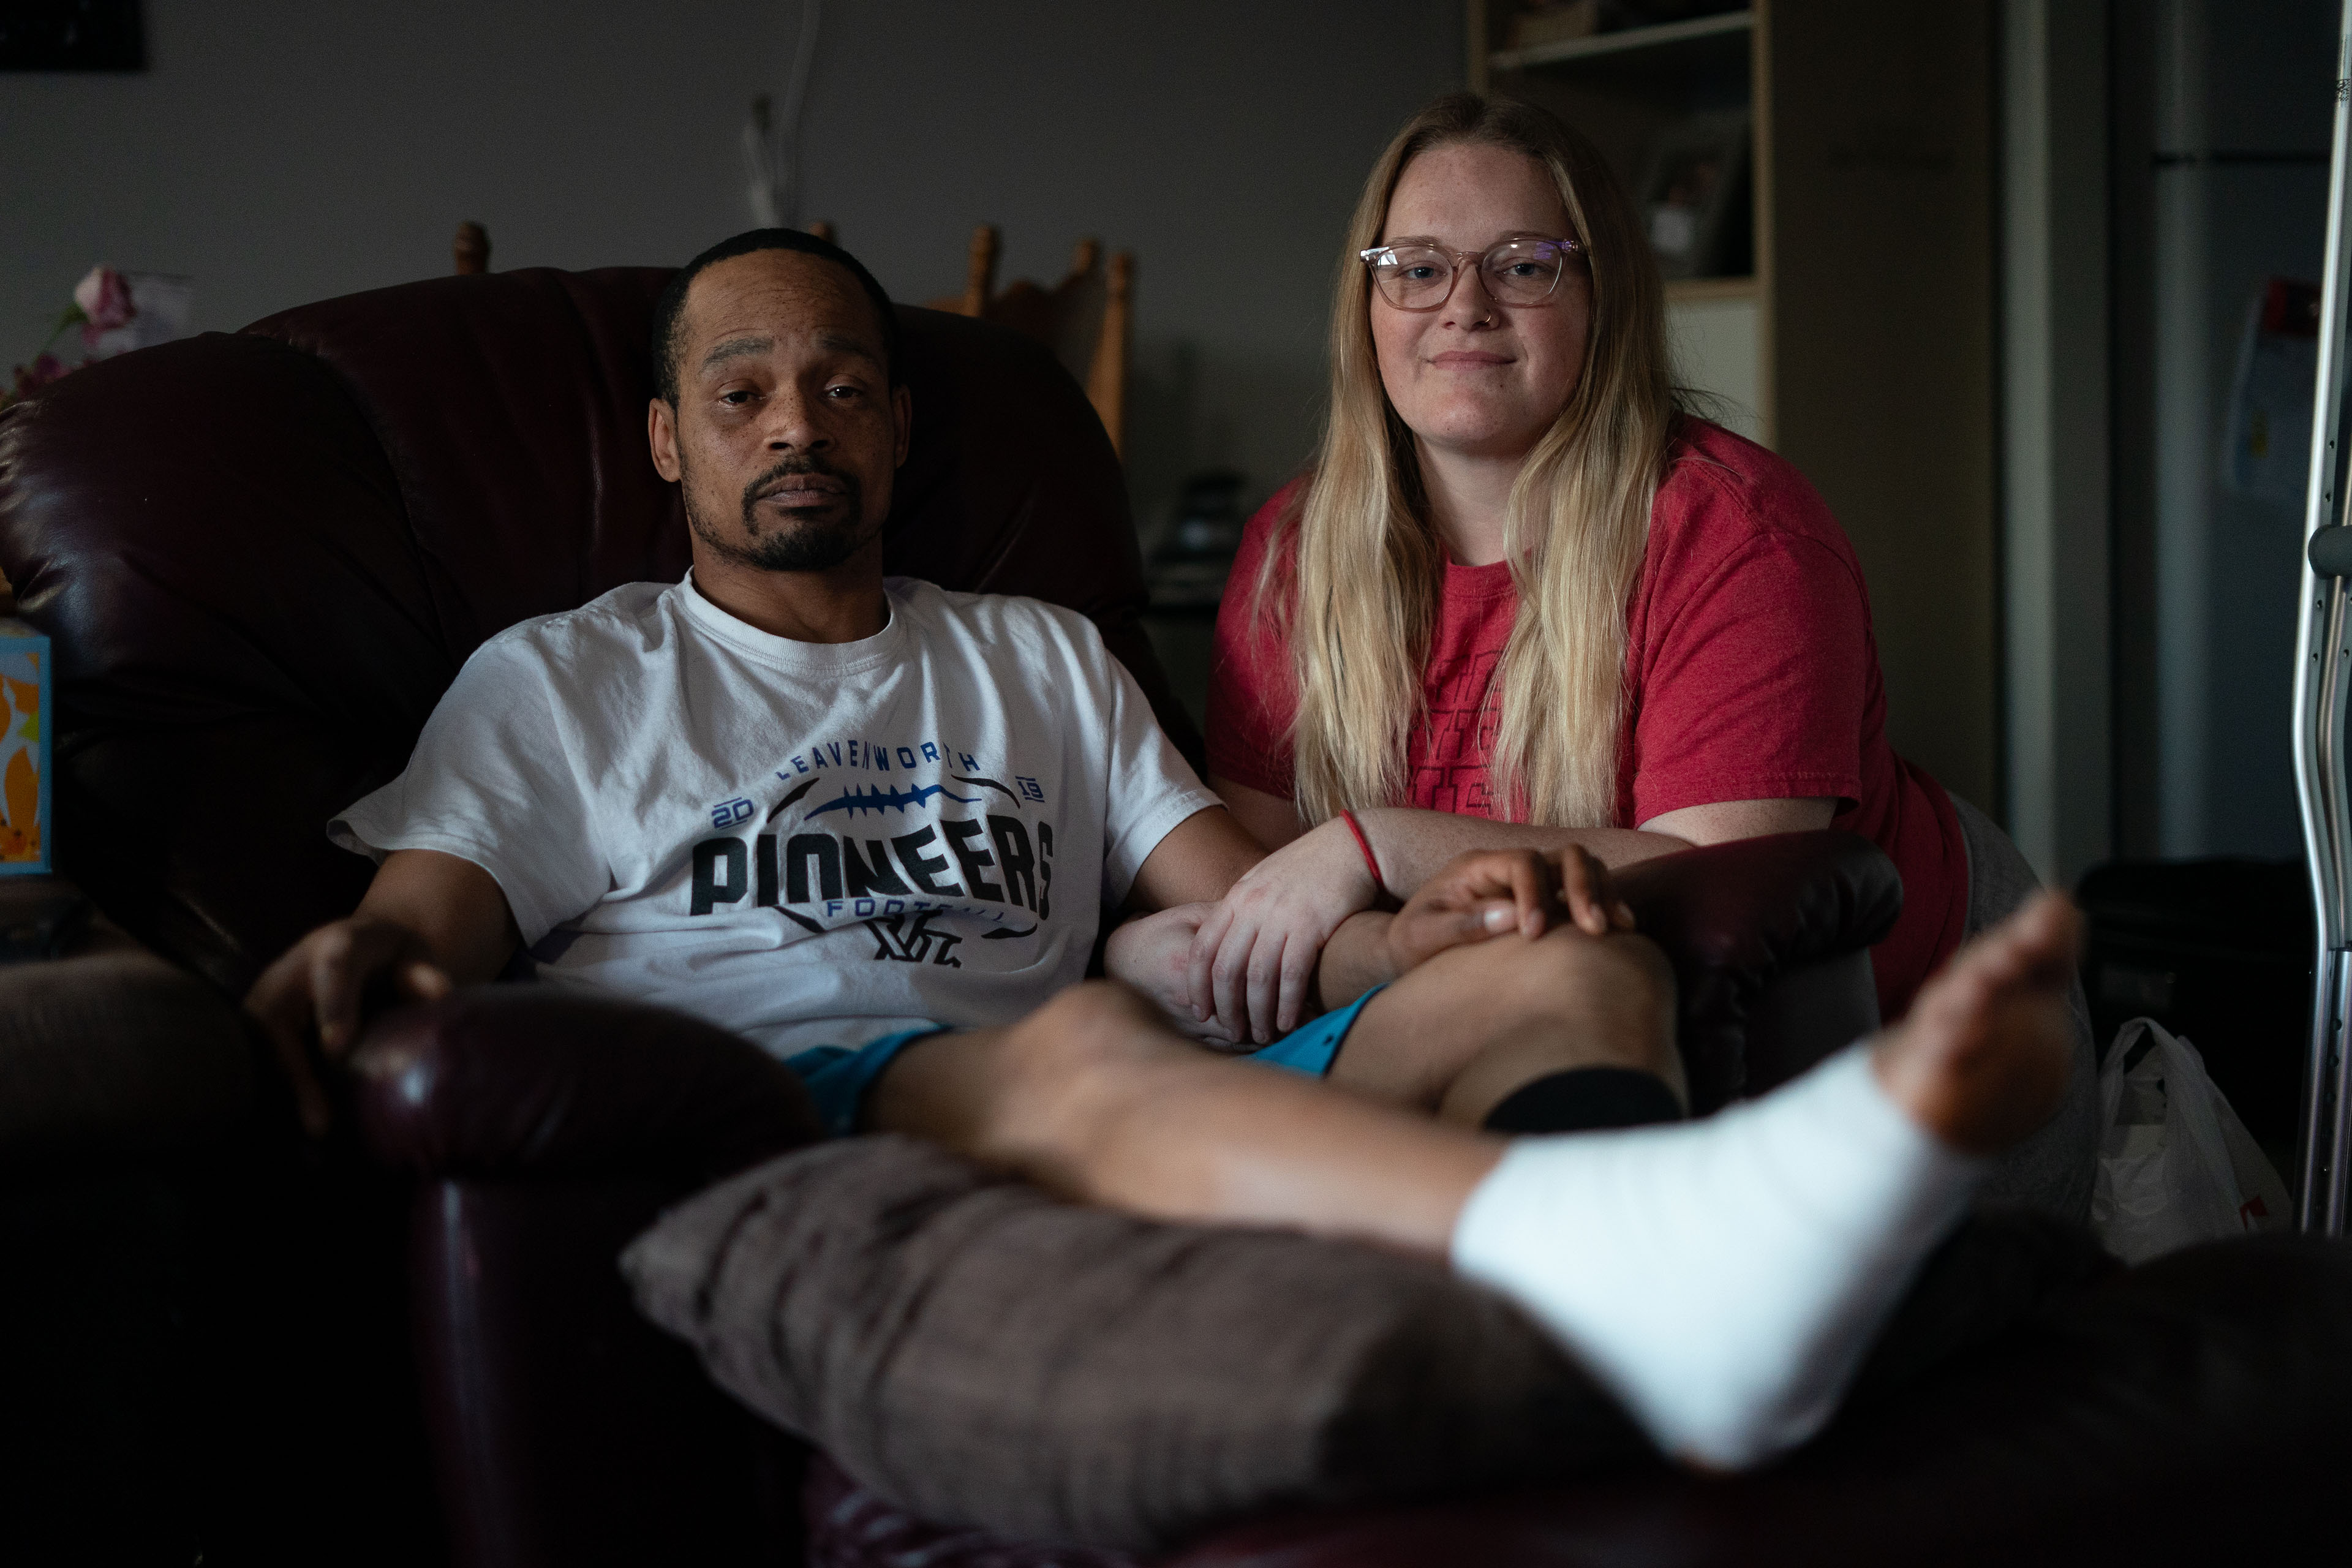 Jacob Gooch Sr. (left) and Emily Tavis (right) sit beside each other in their home, with arms linked. Gooch Sr. is sitting in a recliner with his injured leg raised. His foot is wrapped in a white bandage.